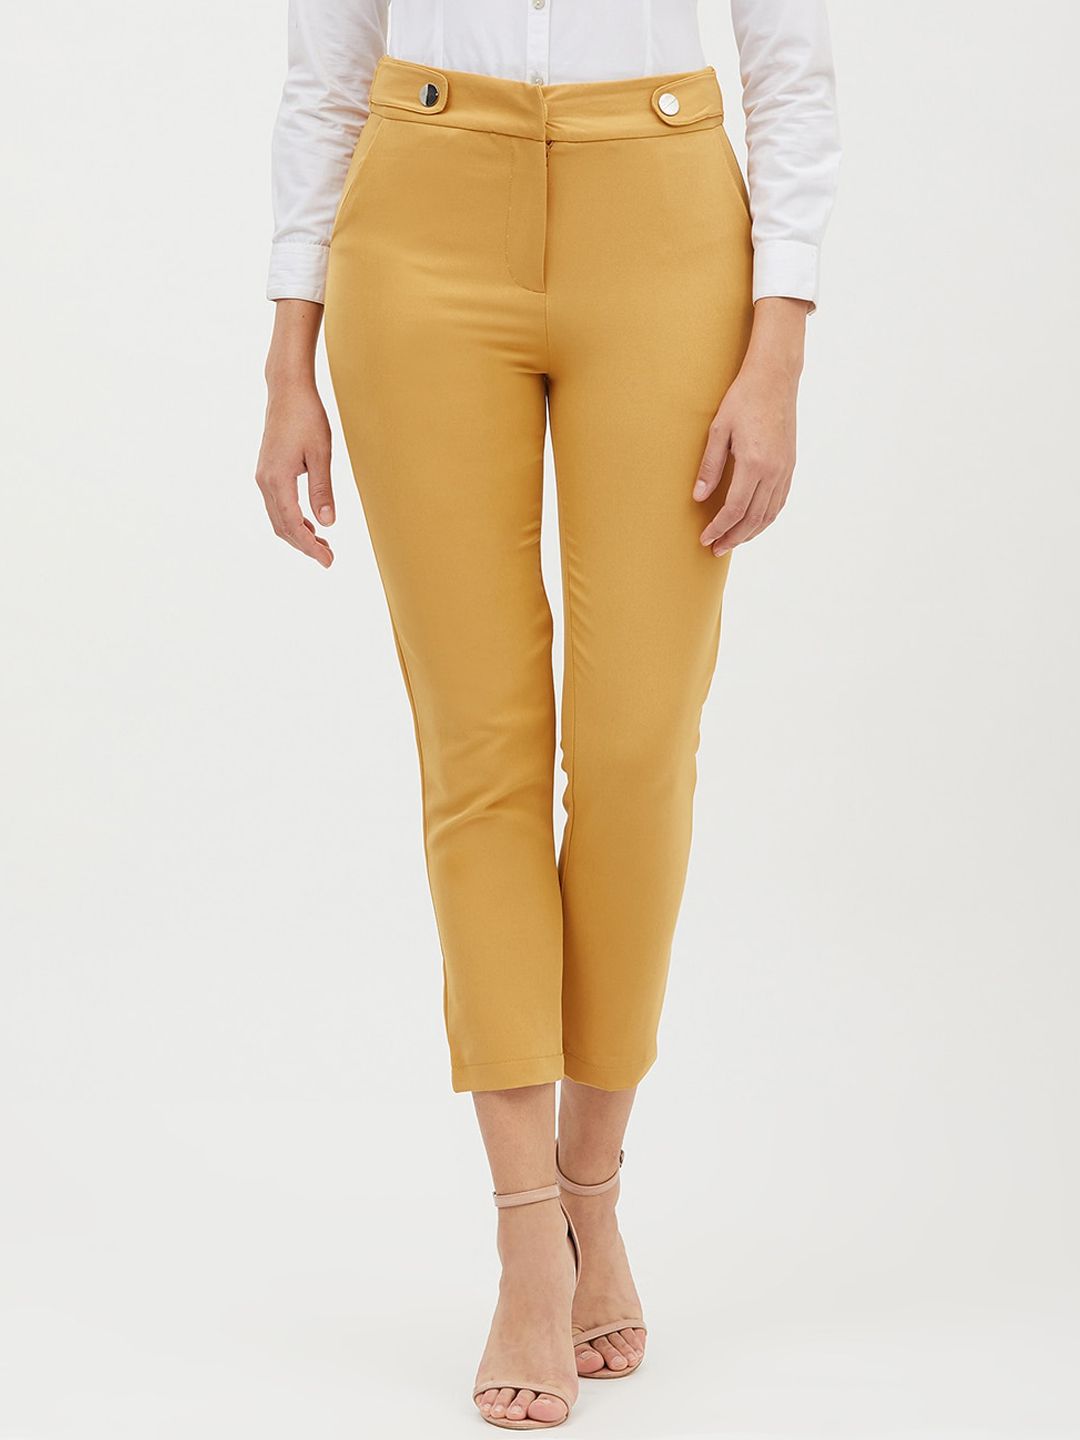 Harpa Women Mustard Yellow Smart Regular Fit Solid Cigarette Trousers Price in India